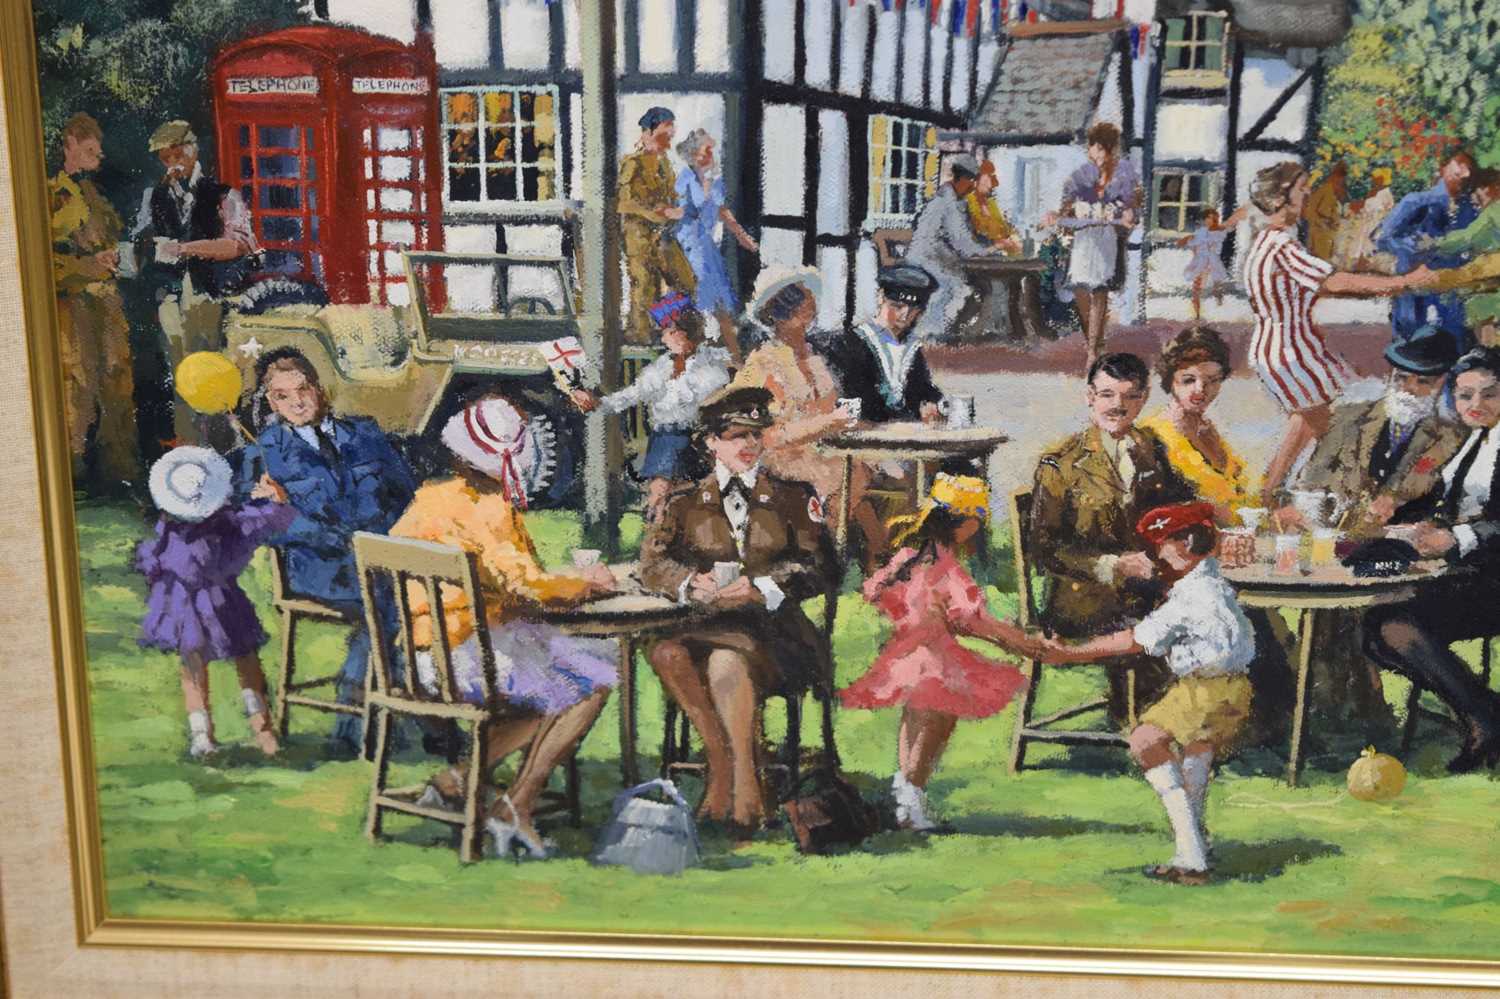 Alan King (1946-2013) - Oil on canvas - 'In The Mood For Celebrations' - Image 6 of 8